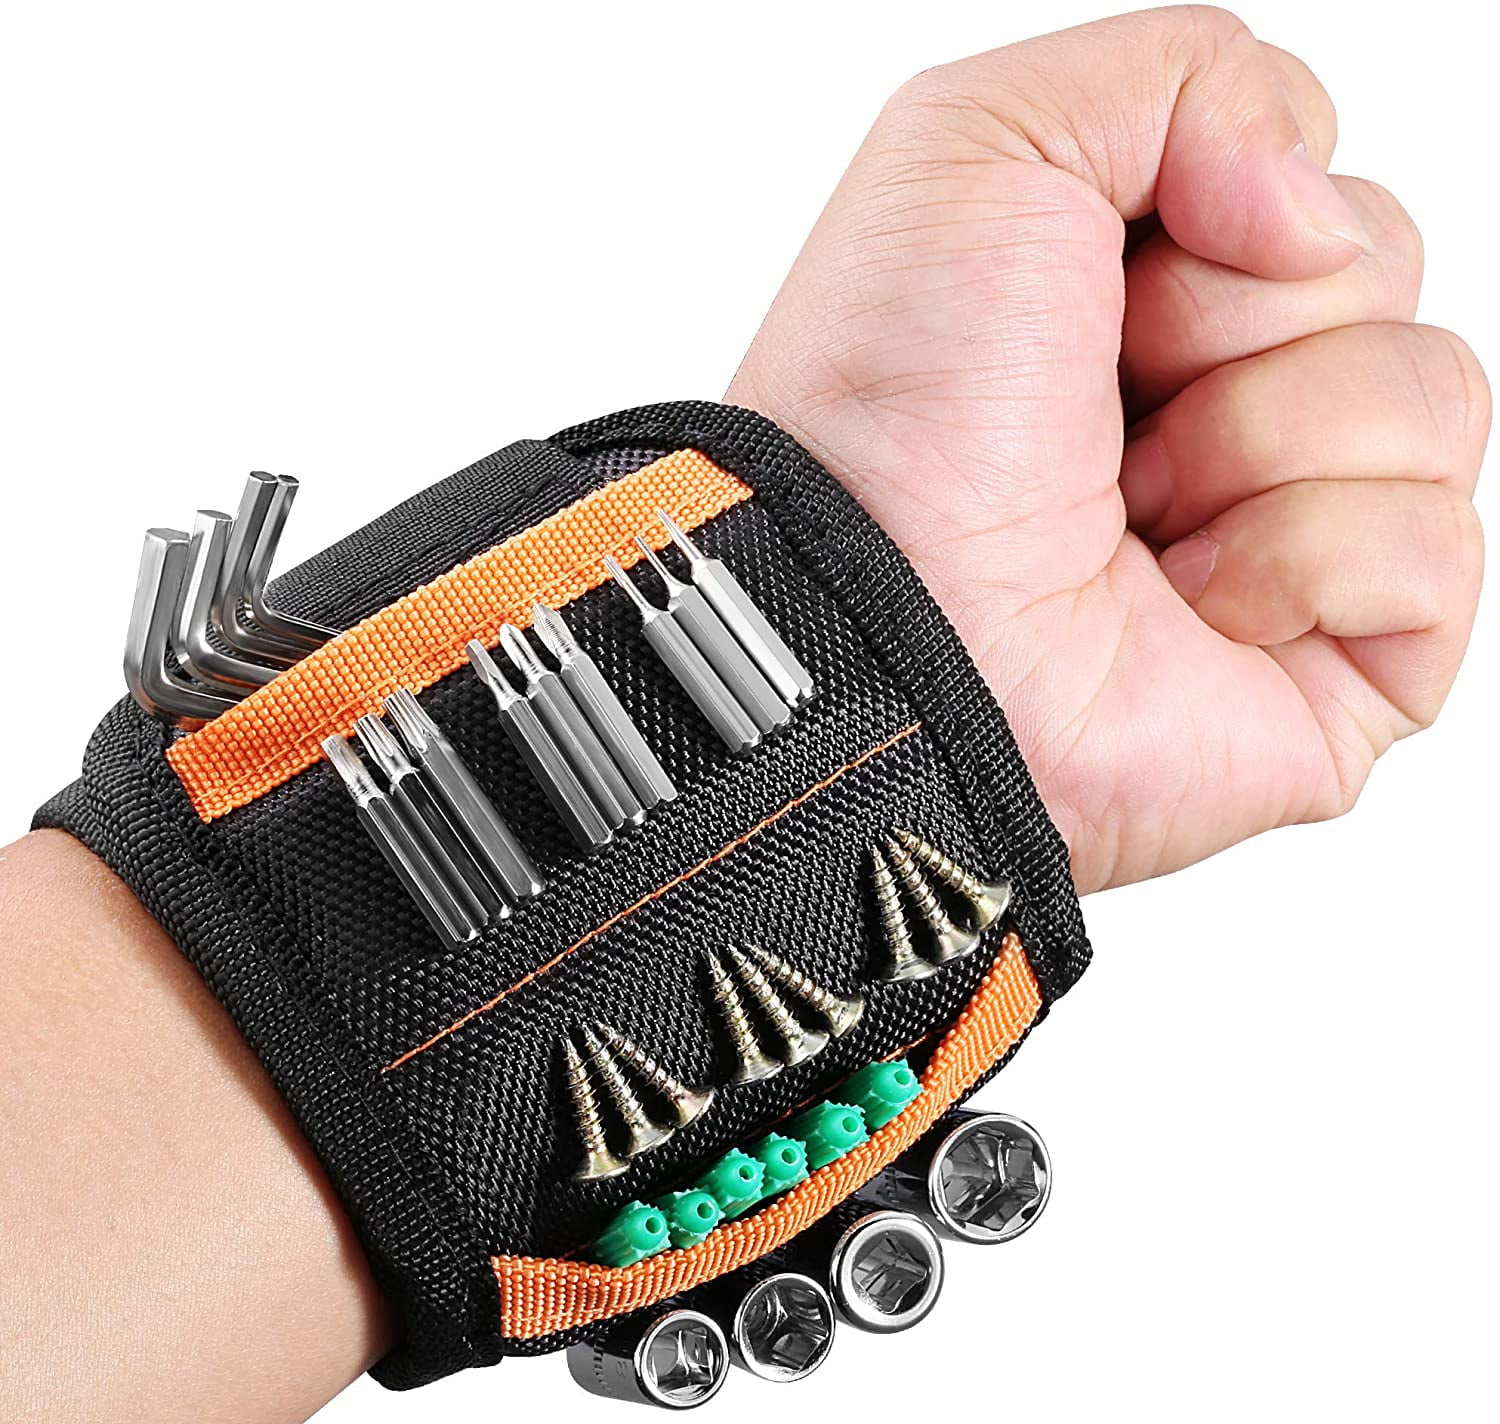 etc screws sticks to nails Magnetic Wrist Band for easy access to metal parts 